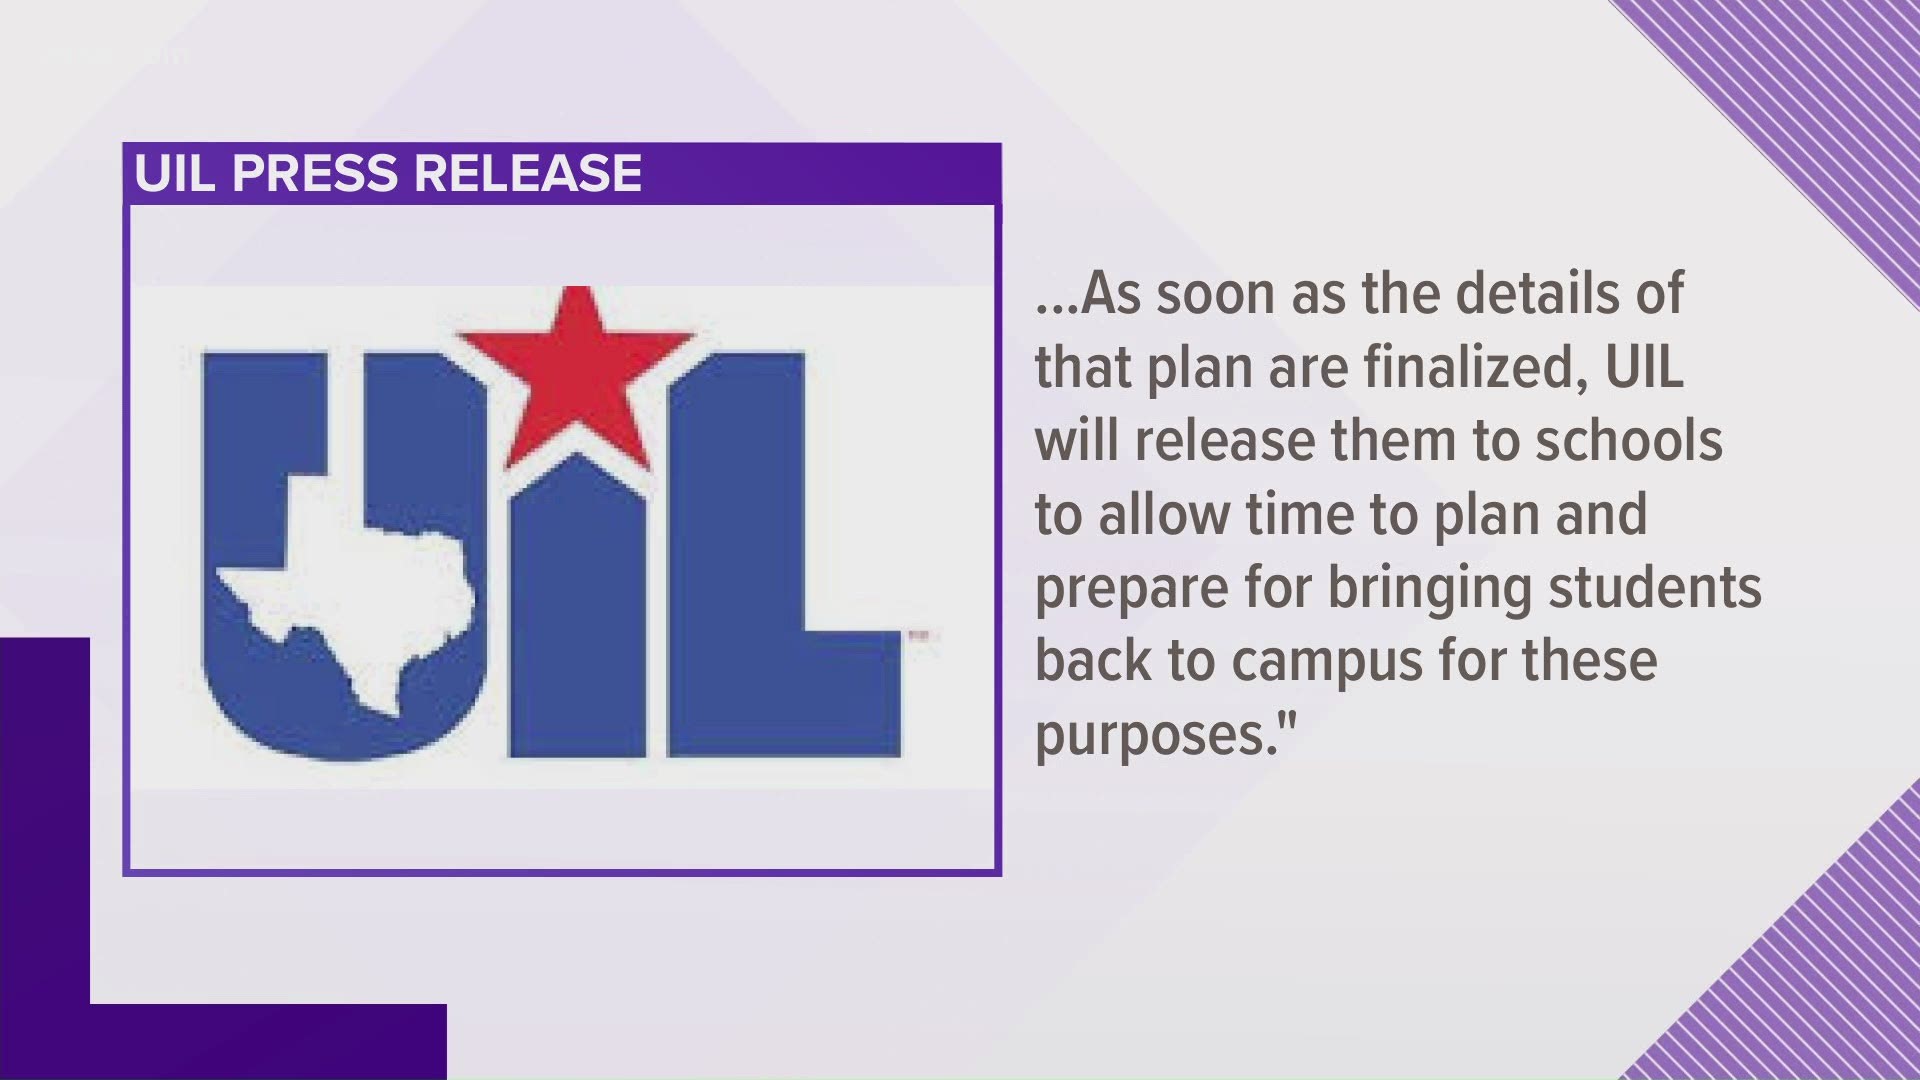 The UIL is also considering allowing marching band activities on the same date.